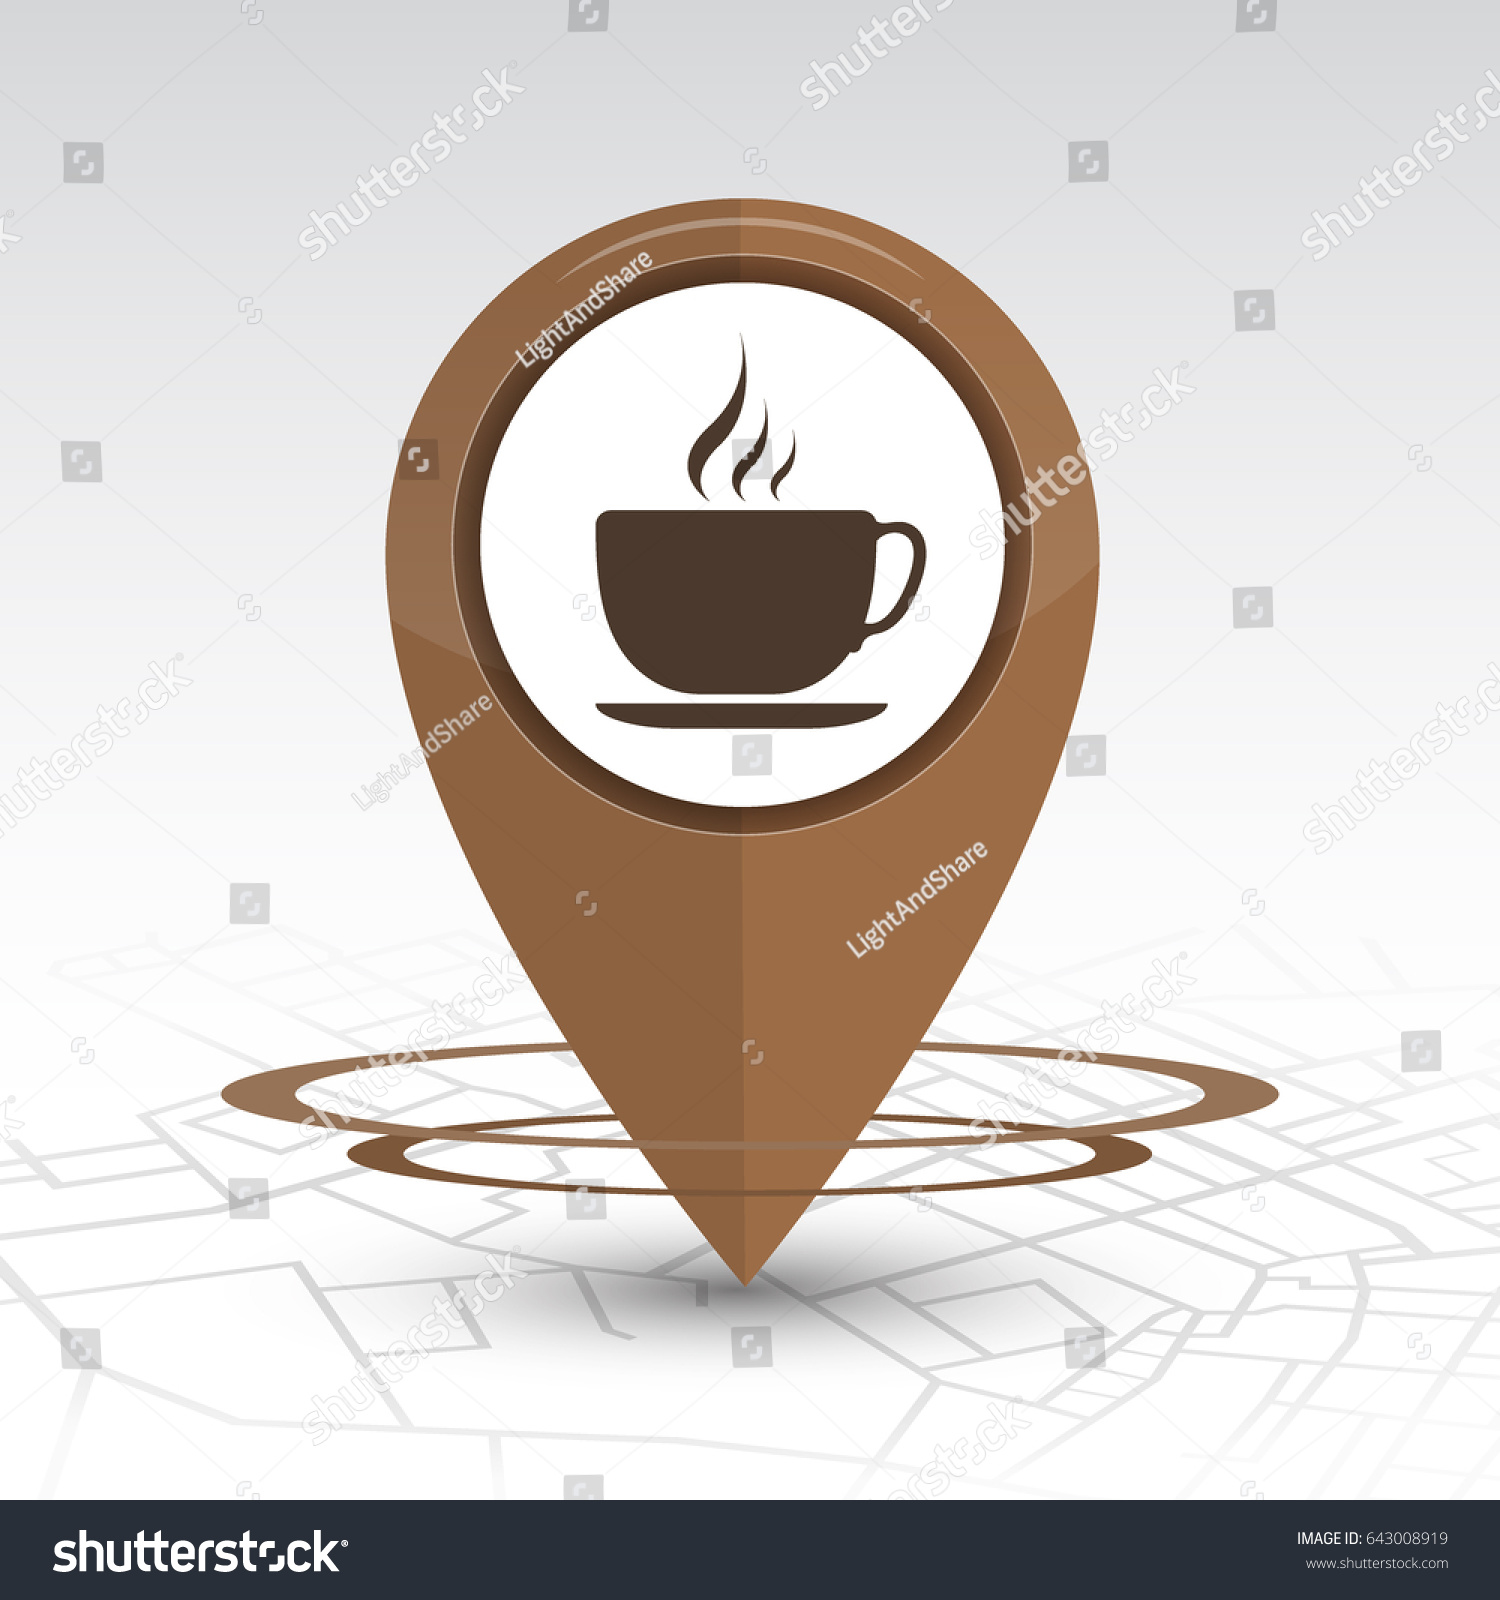 Coffee location How to